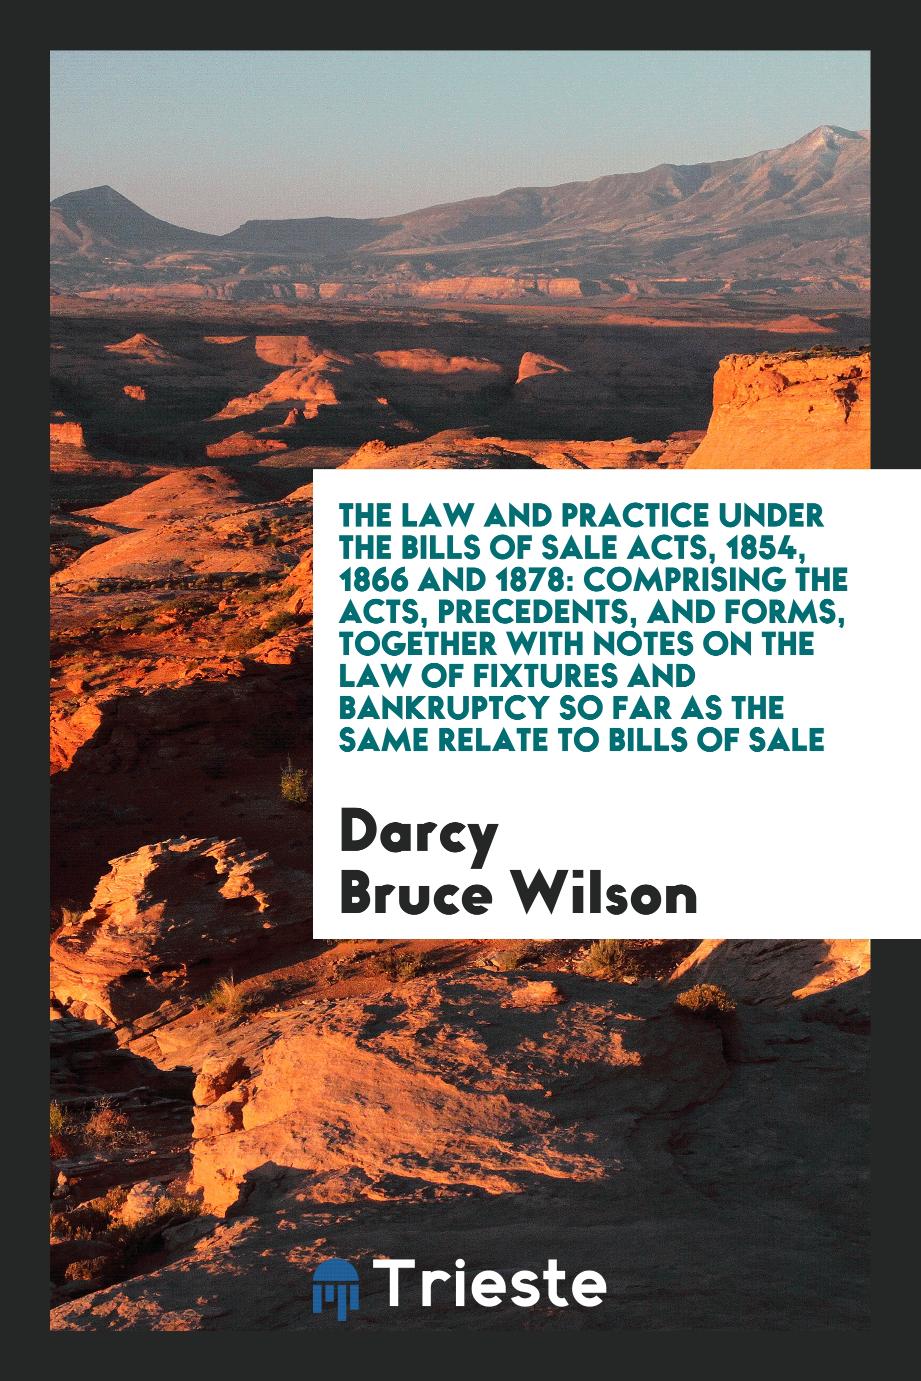 The Law and Practice under the Bills of Sale Acts, 1854, 1866 and 1878: Comprising the Acts, Precedents, and Forms, Together with Notes on the Law of Fixtures and Bankruptcy so Far as the Same Relate to Bills of Sale